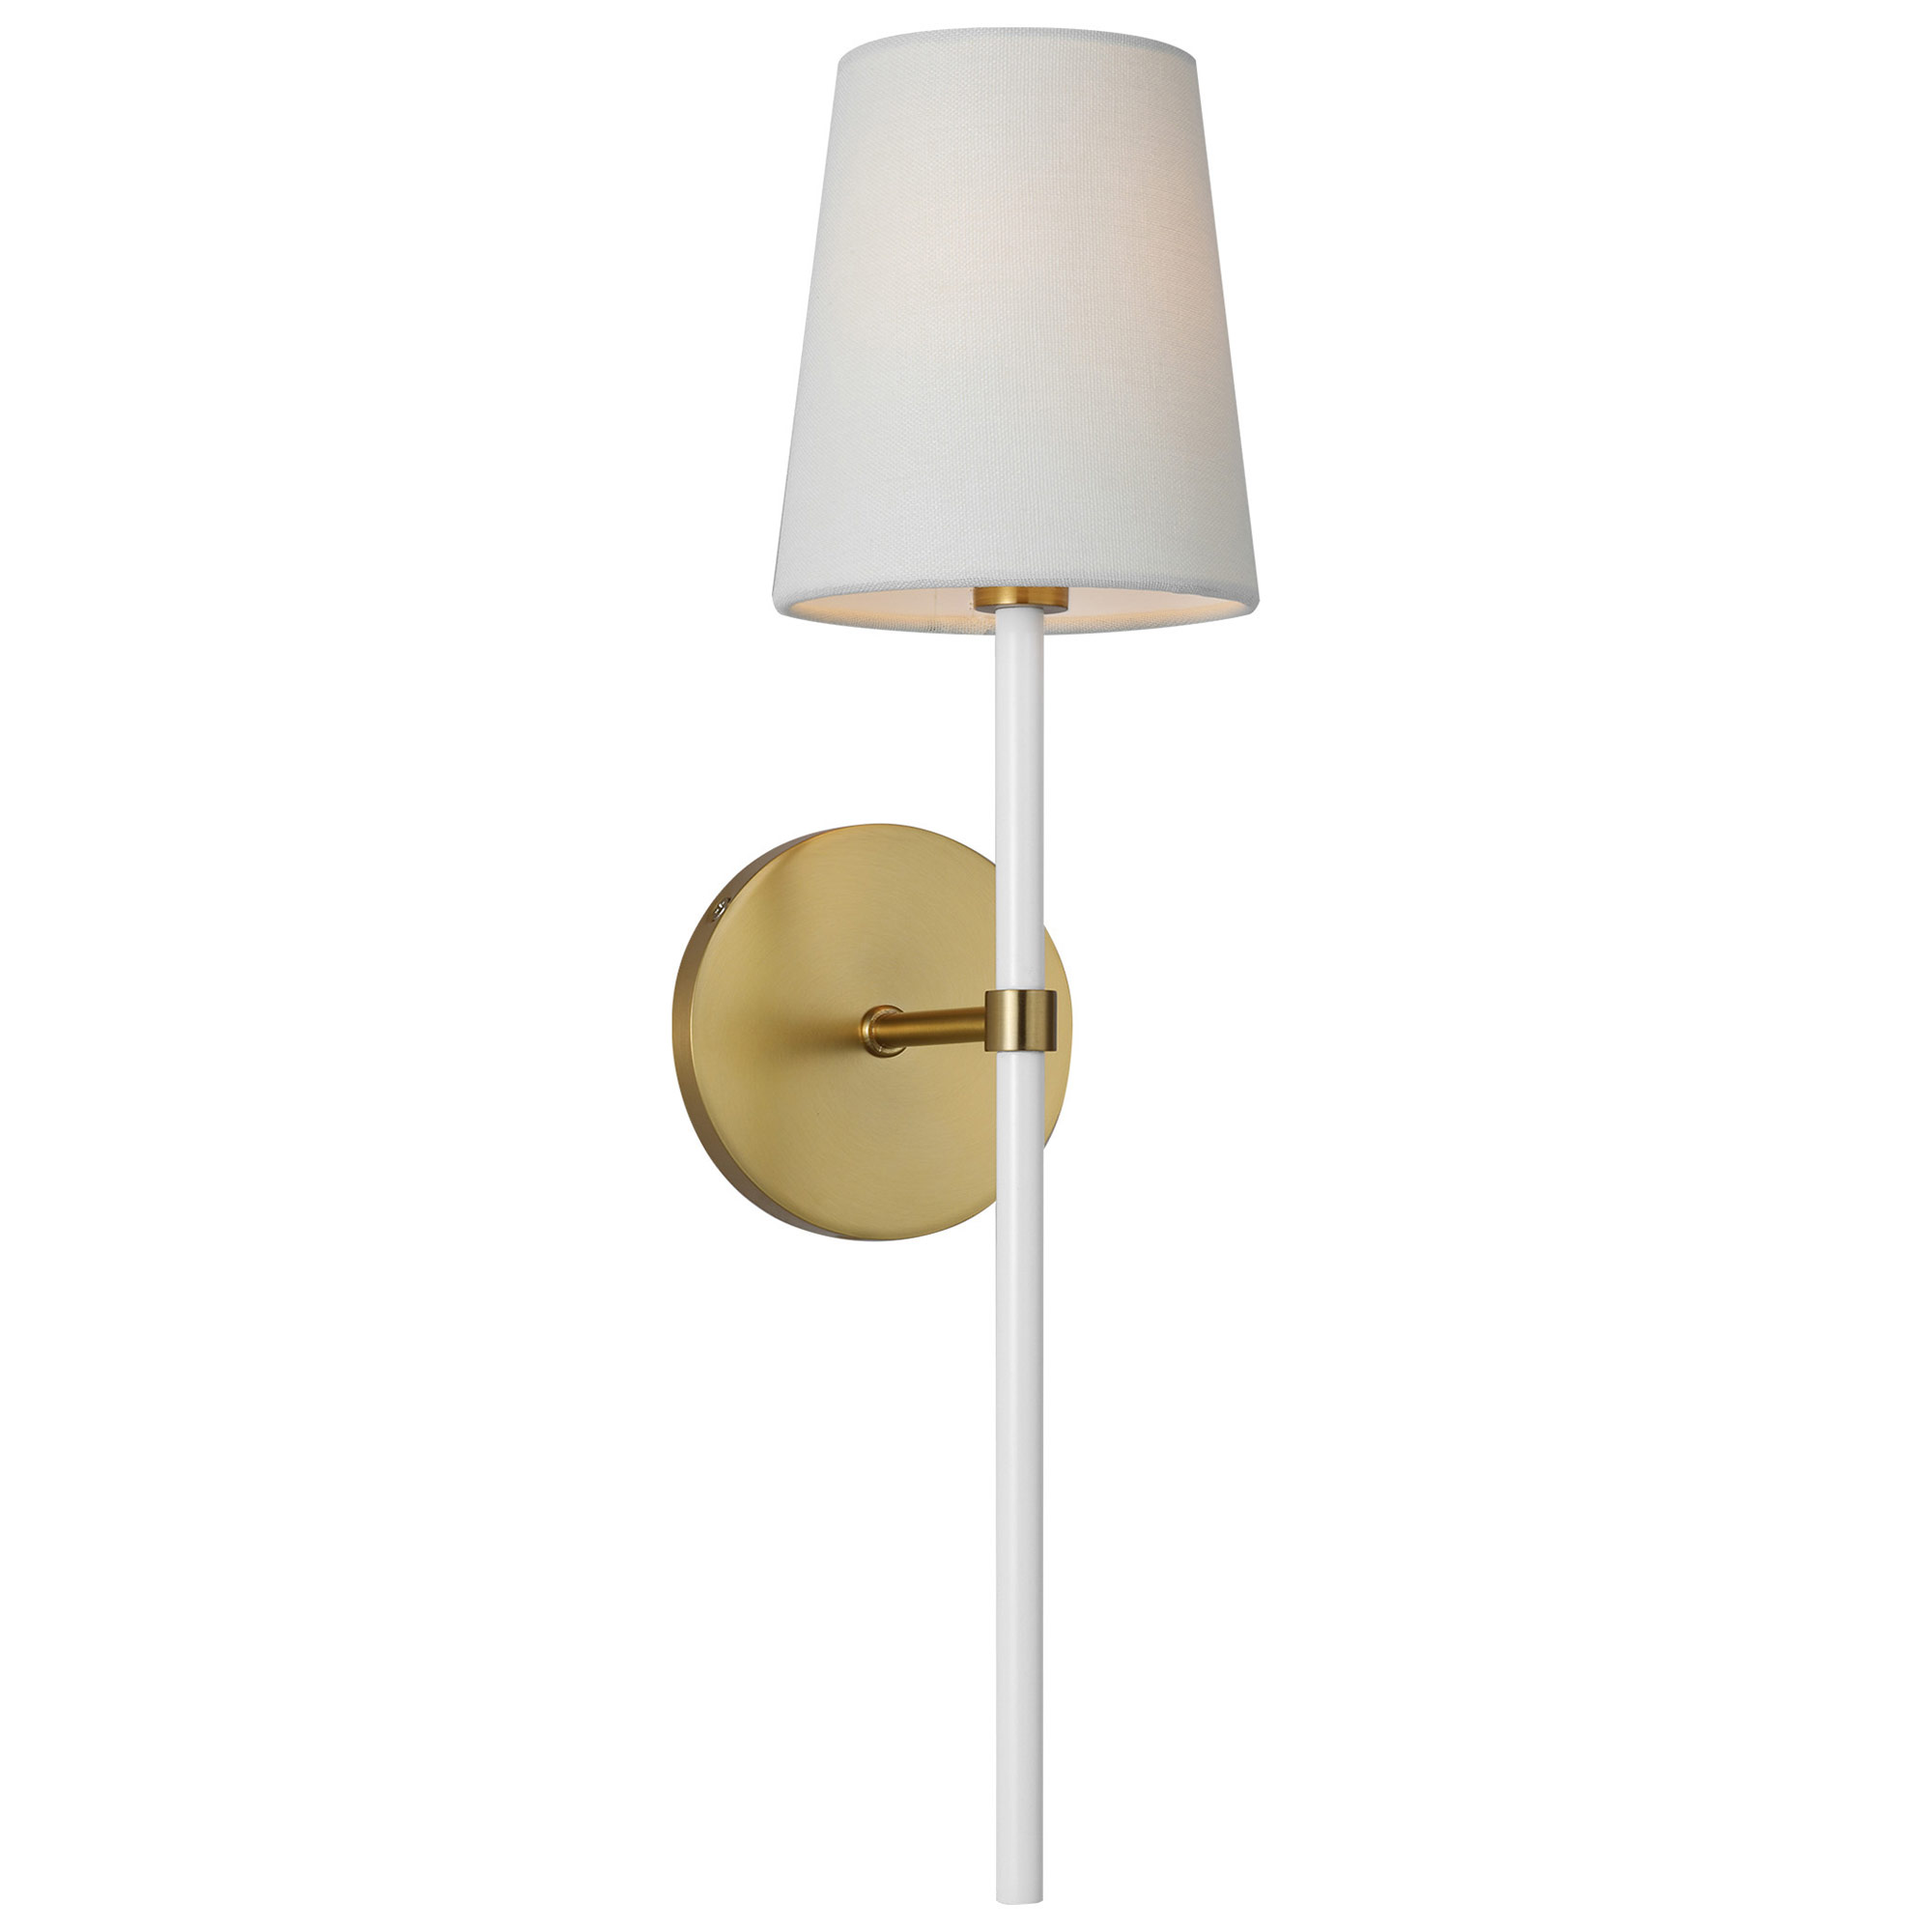 Monroe Tail Wall Sconce by Visual Comfort Studio | KSW1091BBSGW | VCS1086888